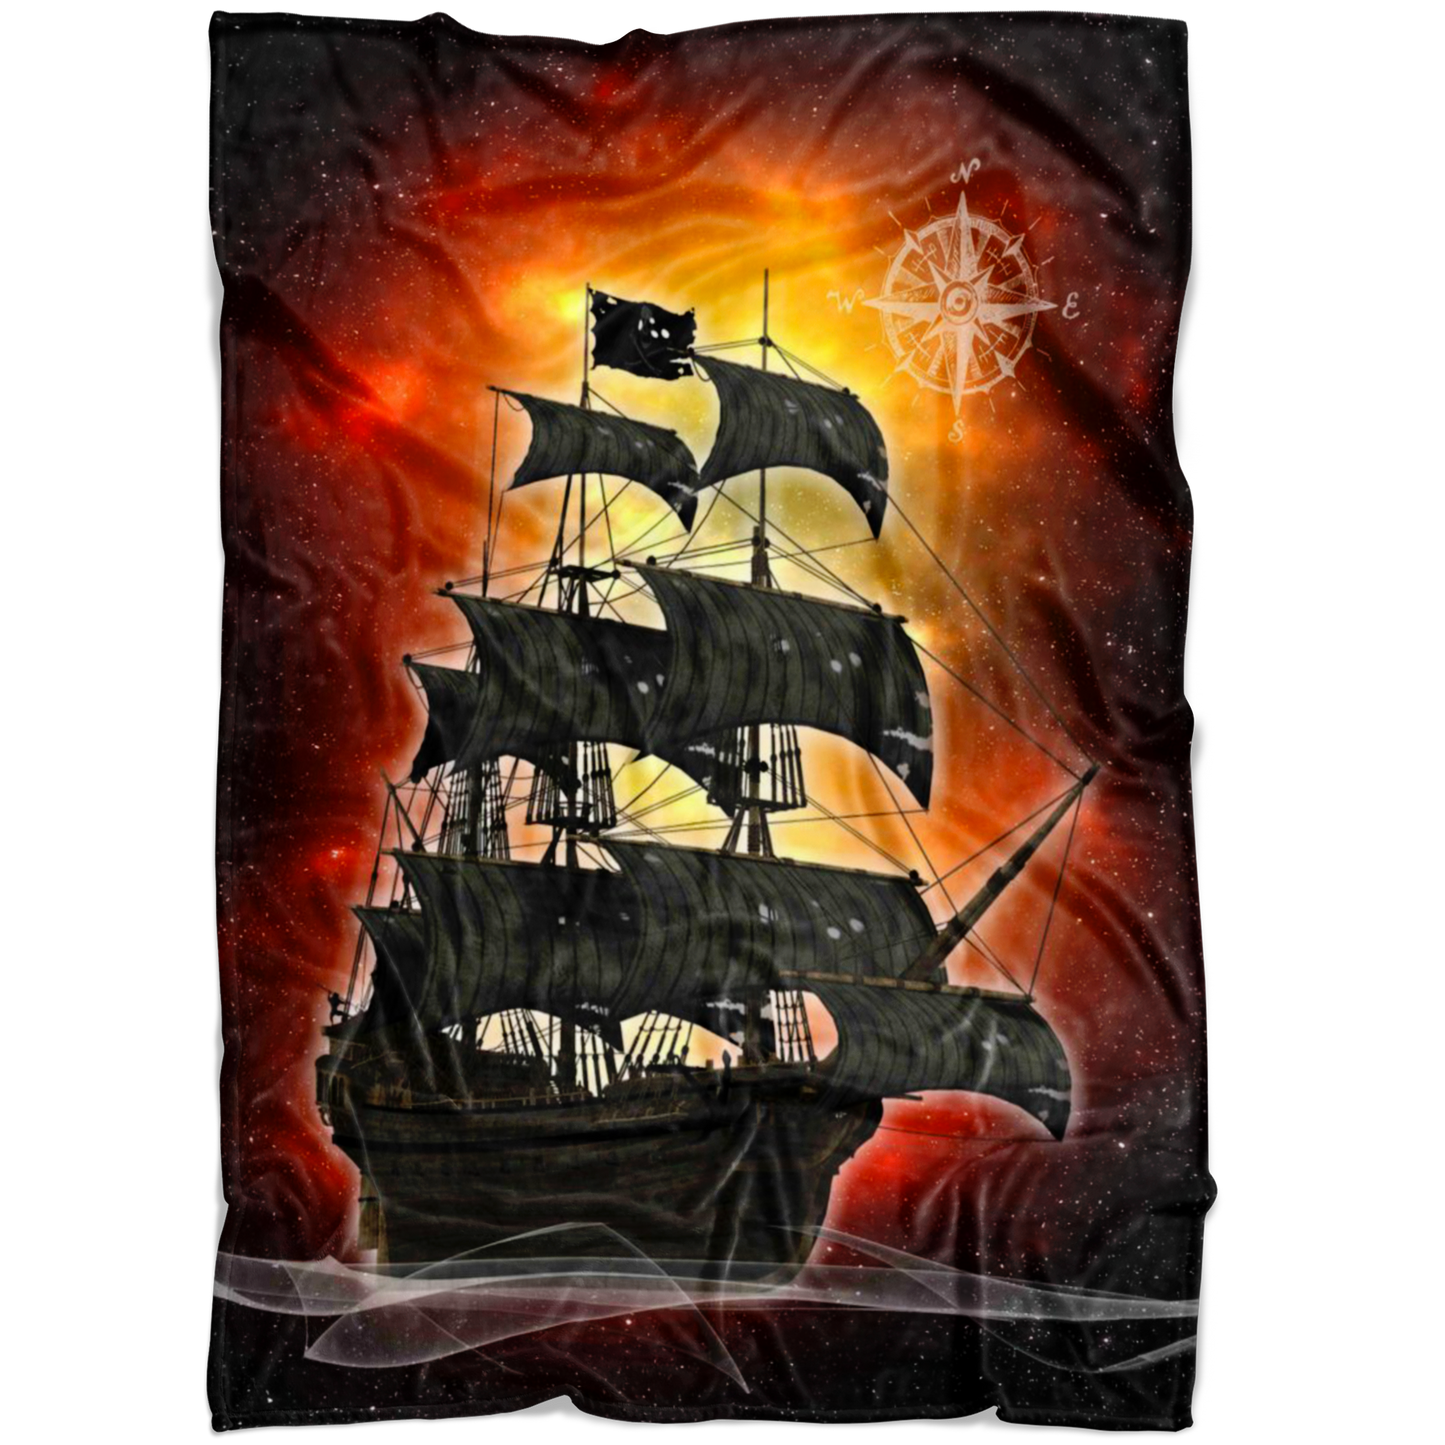 ghost ship, ghost tall ship, pirate ship, pirate art, nebula, pirate tall ship, pirates carribean, pirate star, galaxy, tall ship, compass rose, nautical, pirate captain, pirate wench, pirate scallywag